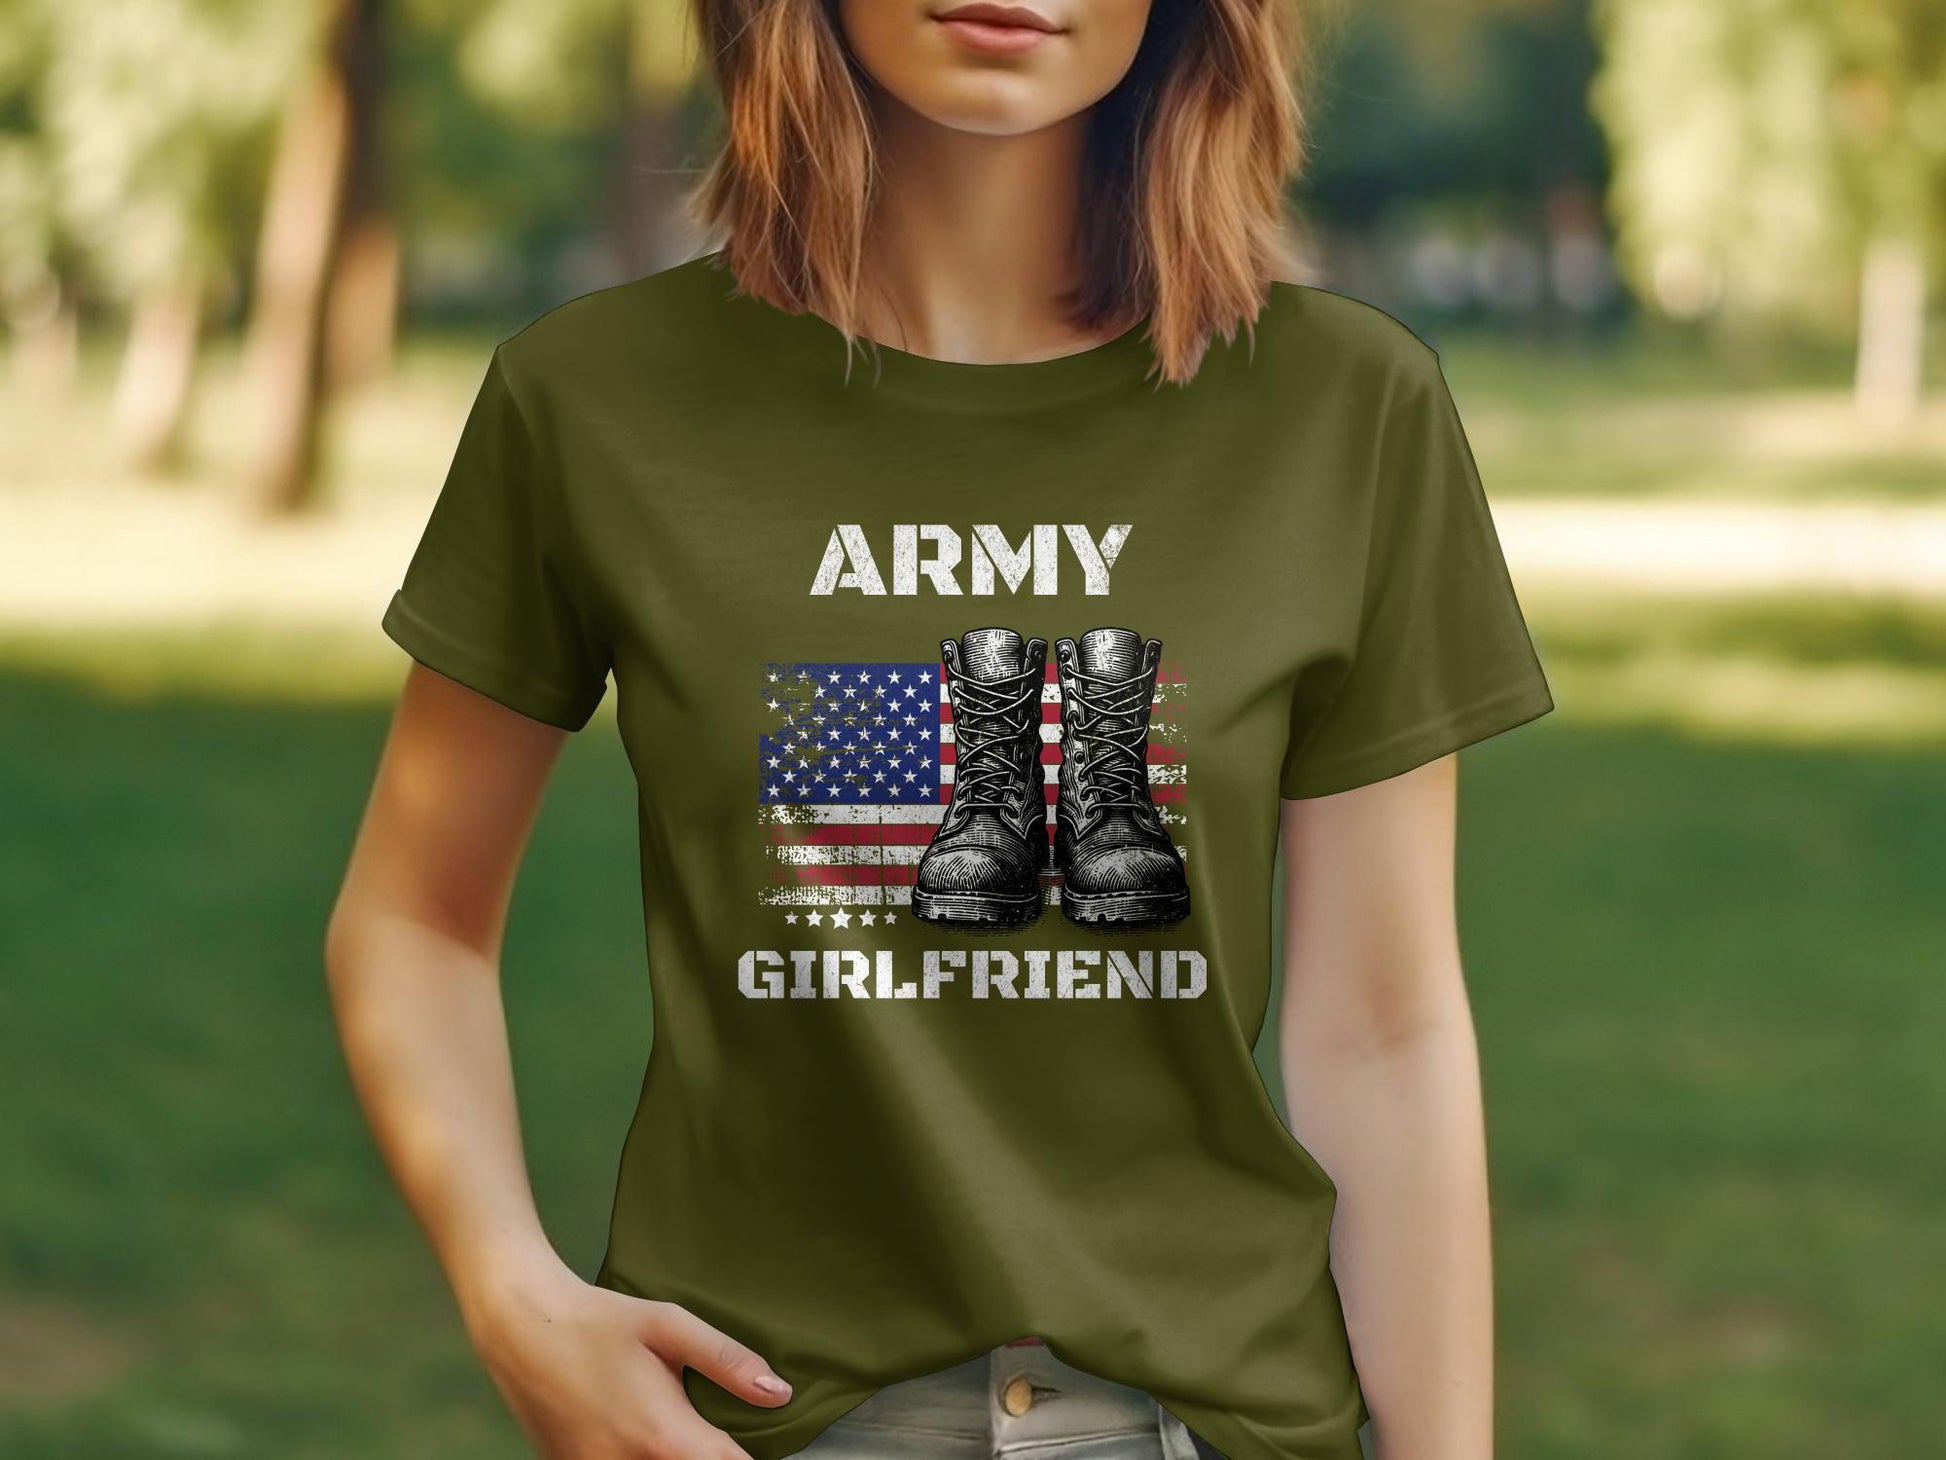 Army Girlfriend Vintage American Flag and Boots T-Shirt, Patriotic Military Shirt - Mardonyx T-Shirt XS / Olive